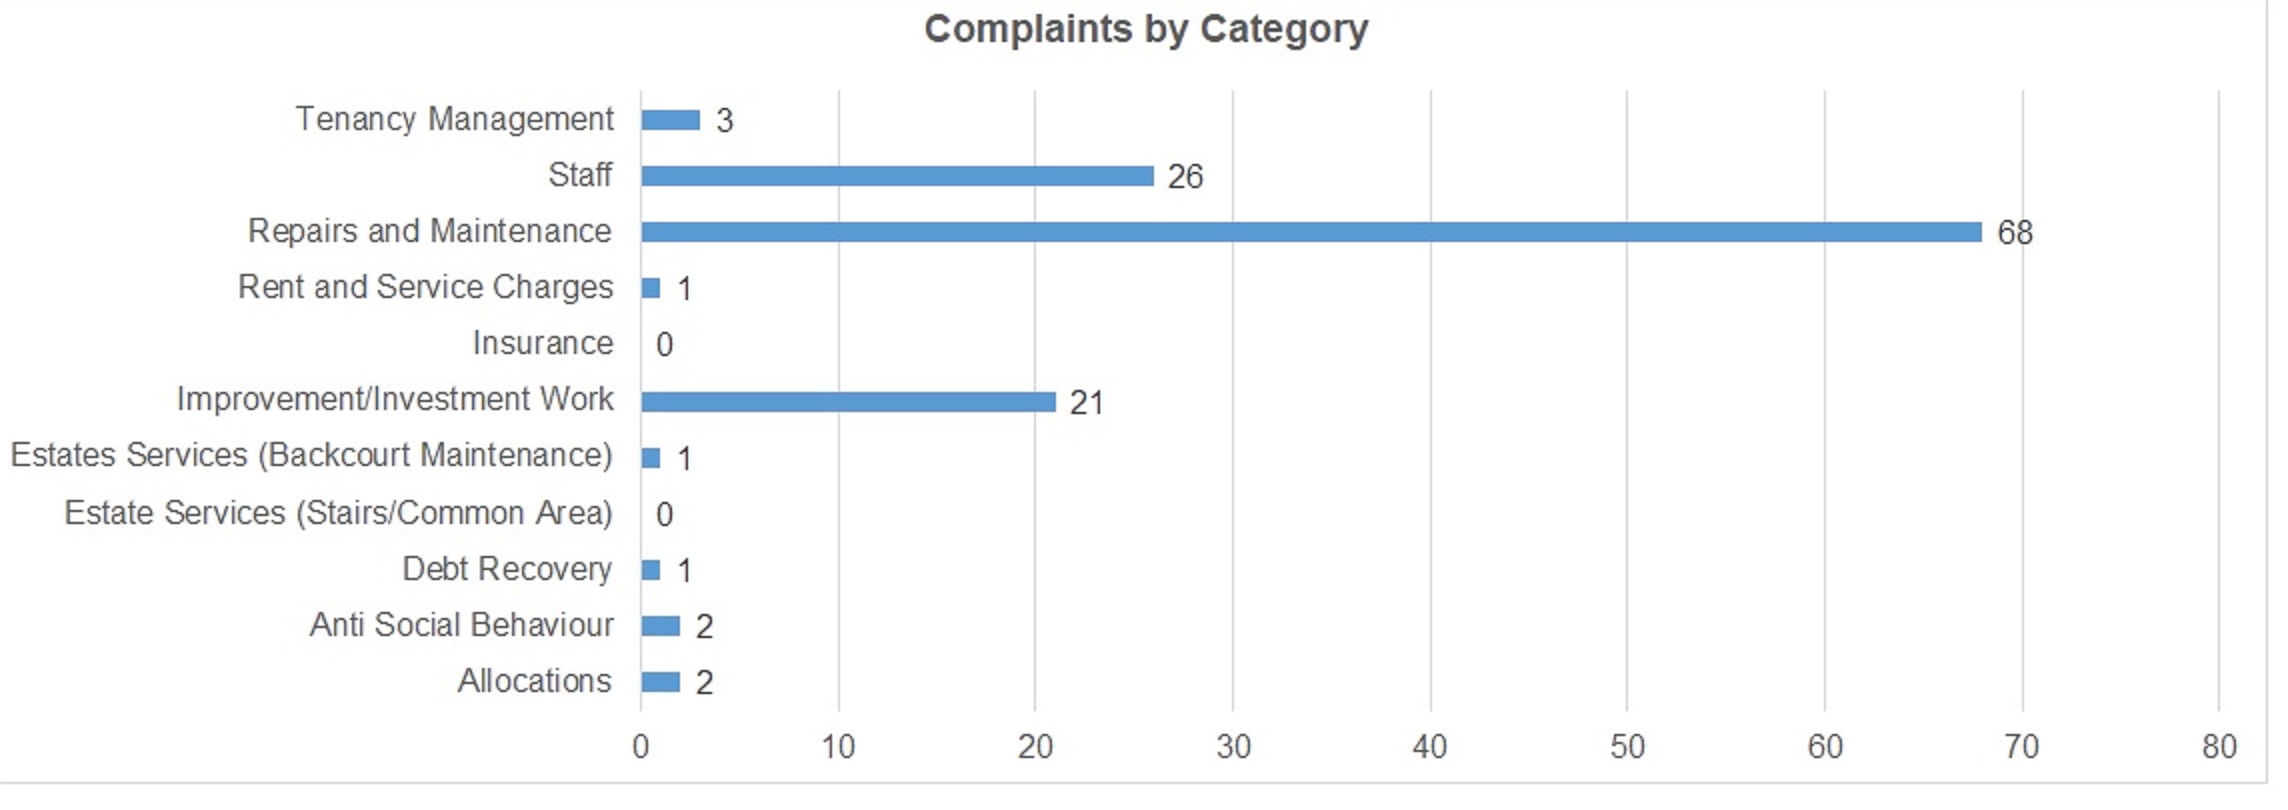 Complaints by category